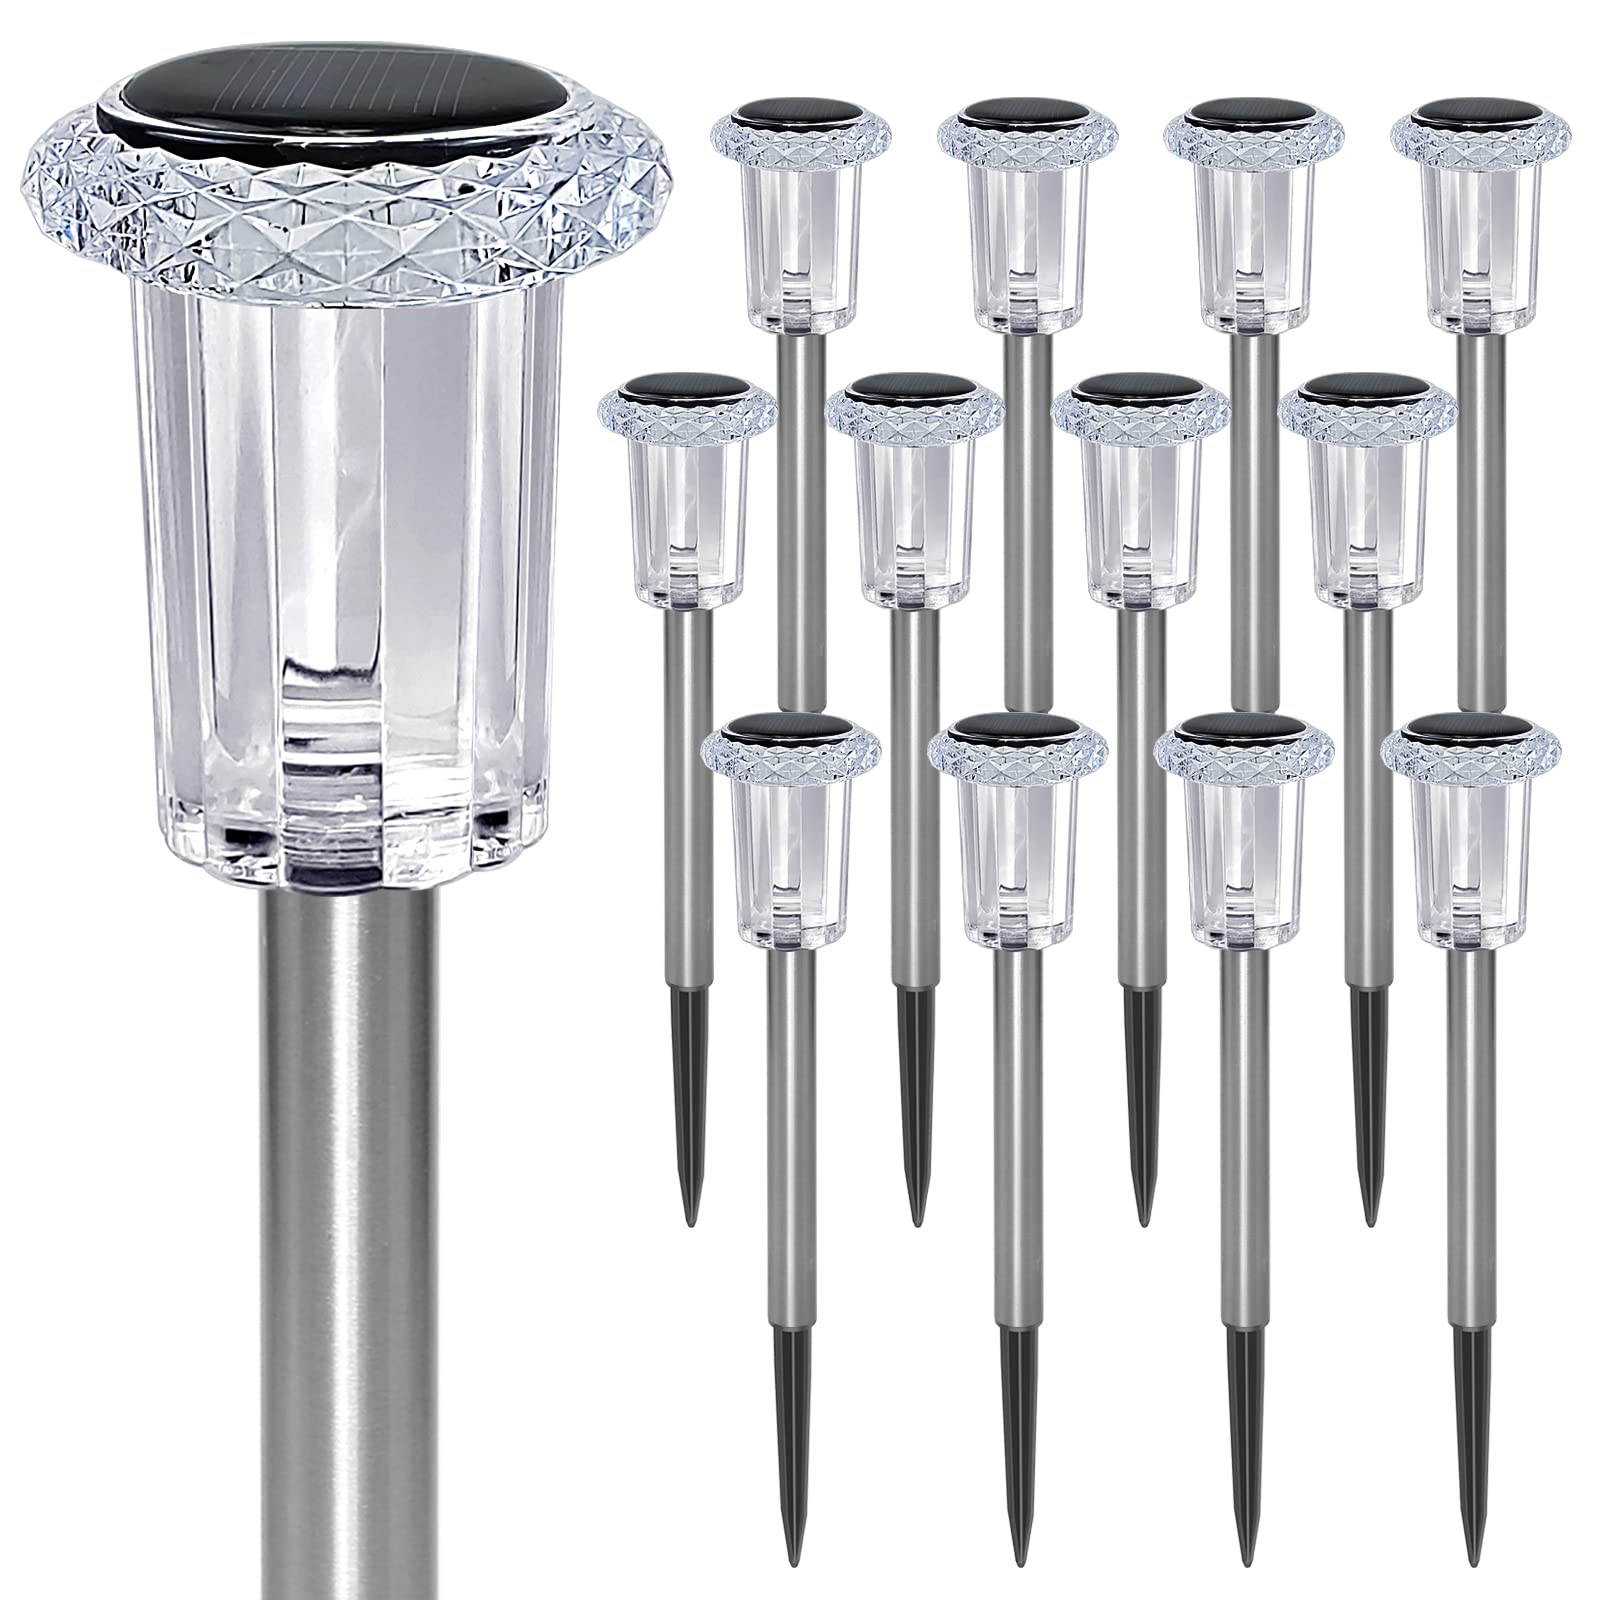 Lianglome Solar Outdoor Lights - 12 Pk Solar Lights Outdoor Waterproof Stainless Steel Solar Pathway Lights For Patio, Lawn, Yar